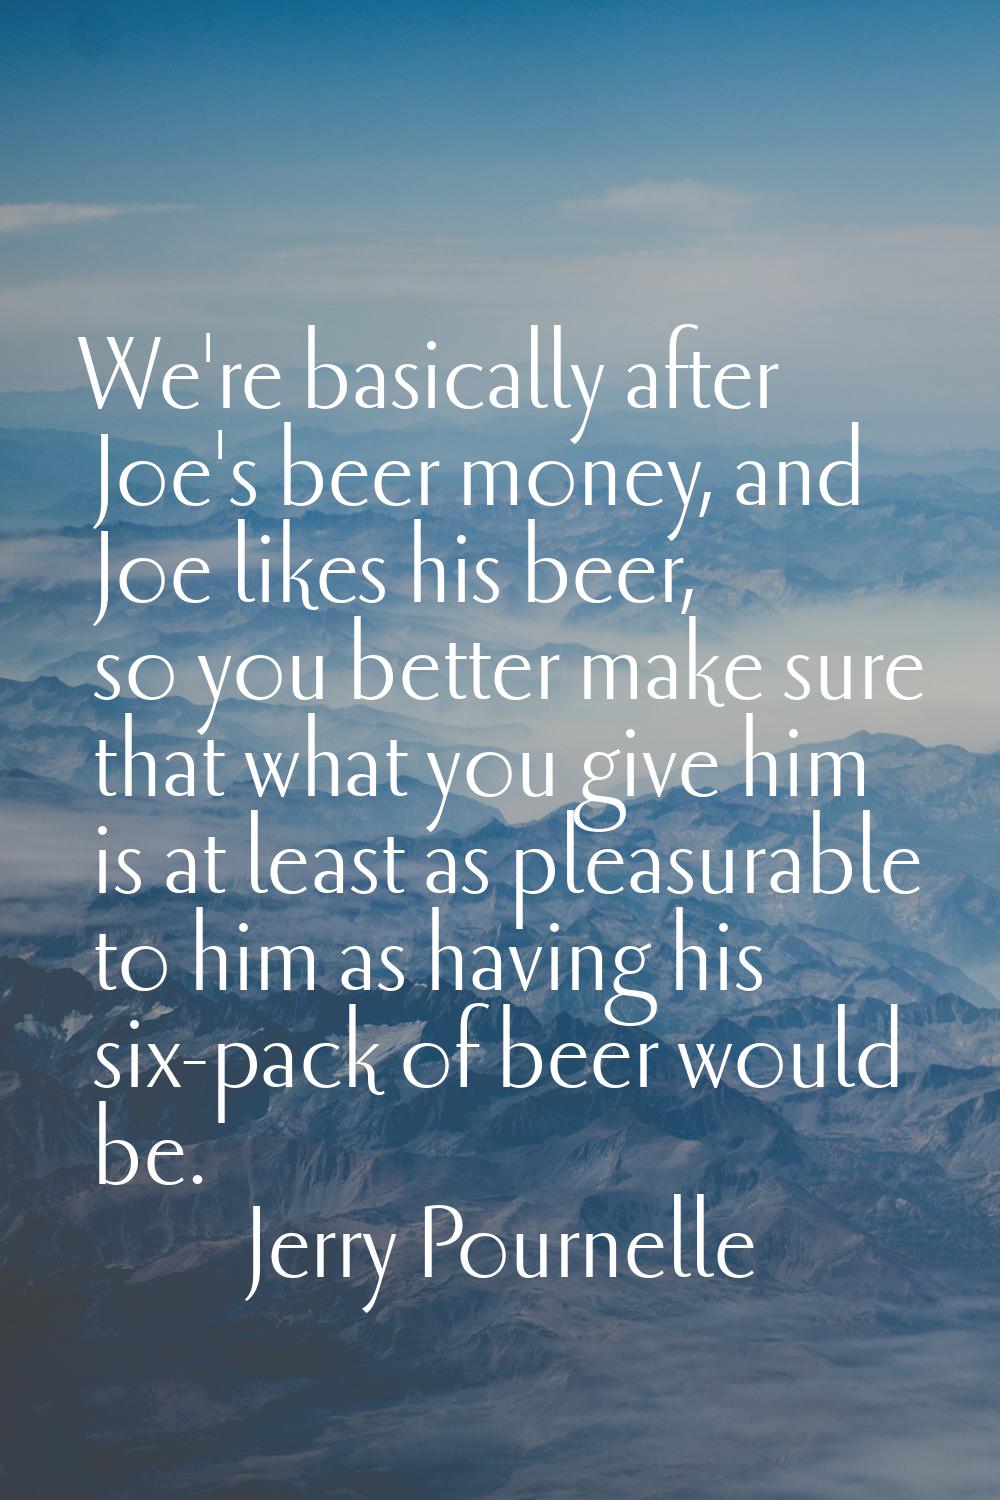 We're basically after Joe's beer money, and Joe likes his beer, so you better make sure that what y